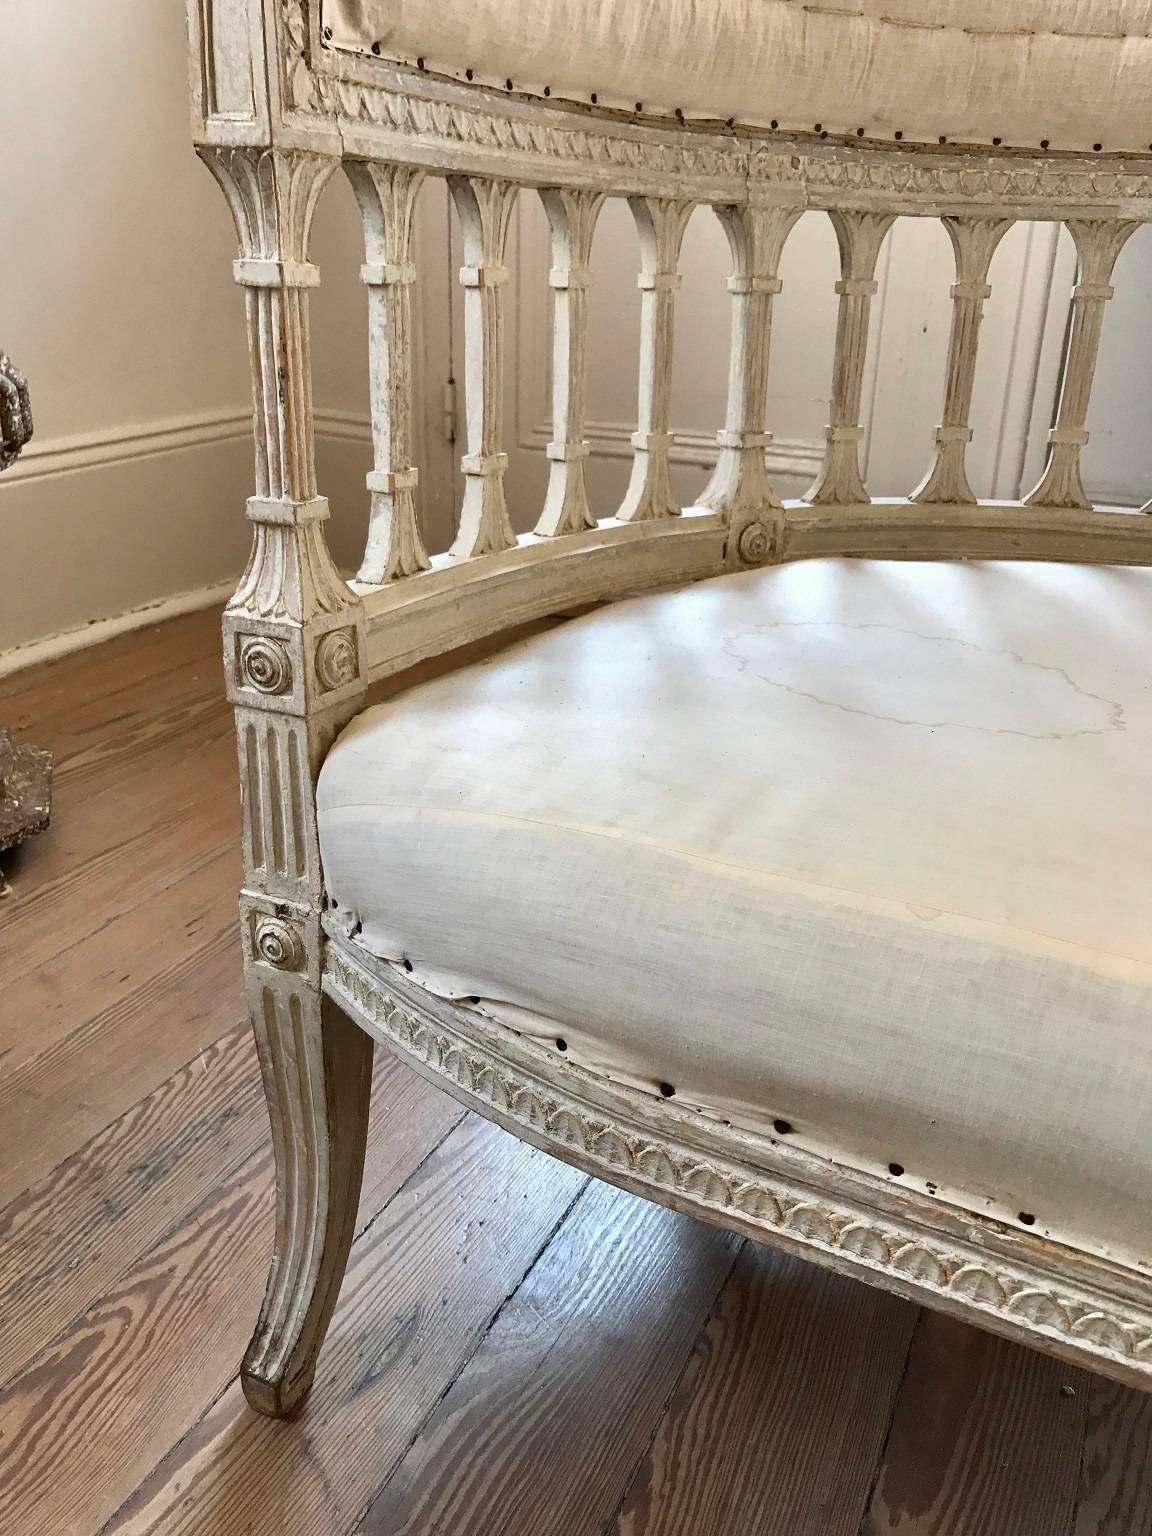 Exceptional and fine Gustavian Klismos settee attributable to Ephraim Stahl (1767-1820), furniture maker to the court of King Gustav; elegantly detailed carving throughout, as is typical of Stahl's work; sabre legs; original paint.